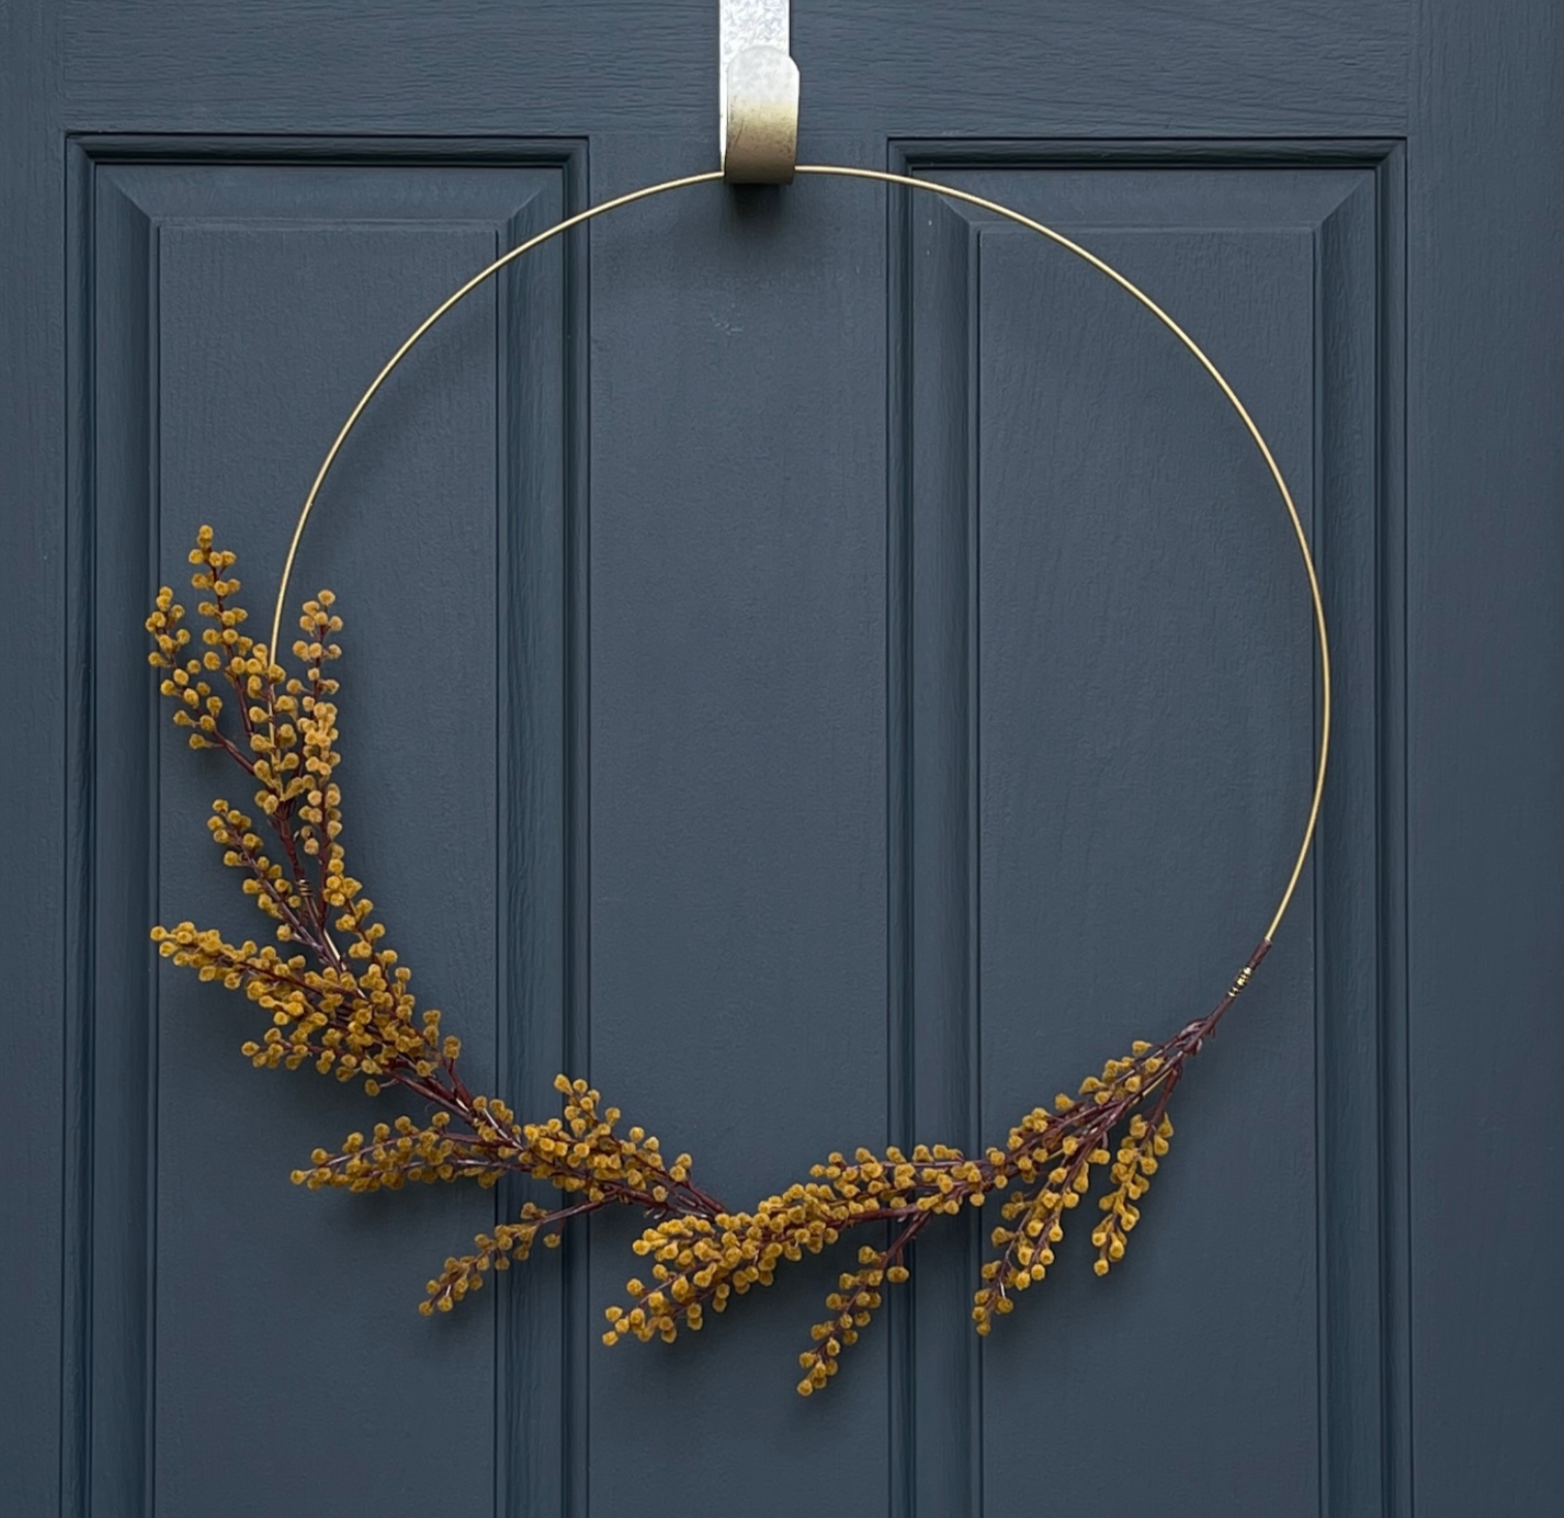 20" fall wreath. Gold hoop with greenish-yellow mimosa sprays. Stem of mimosa spray is wrapped with gold floral wire. Wreath is hanging from a gold hammered wreath hanger on a dark blue front door.